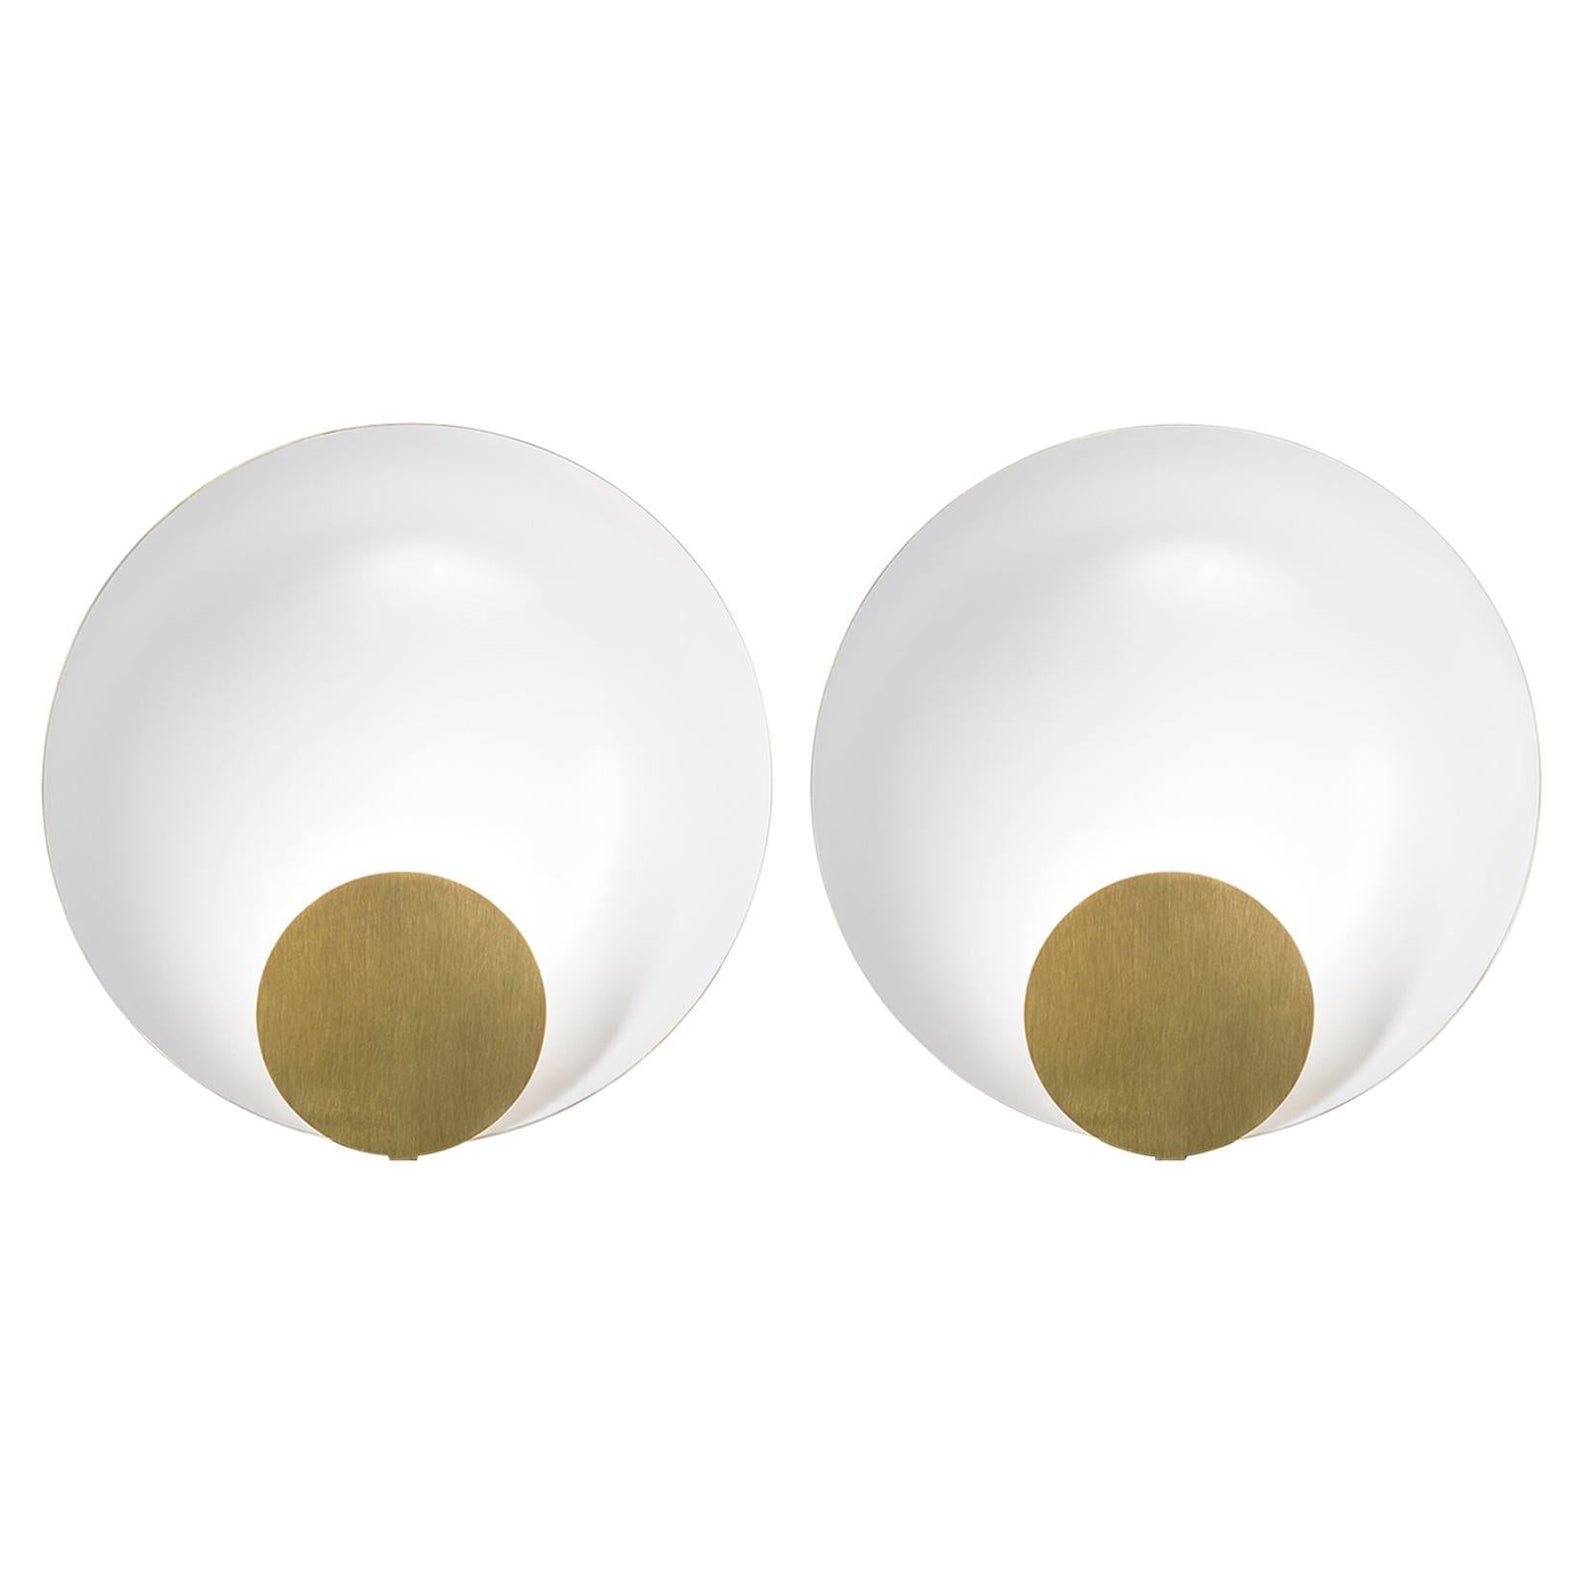 Set of Two Table Lamps 'Siro' Designed by Marta Perla, Manufactured by Oluce